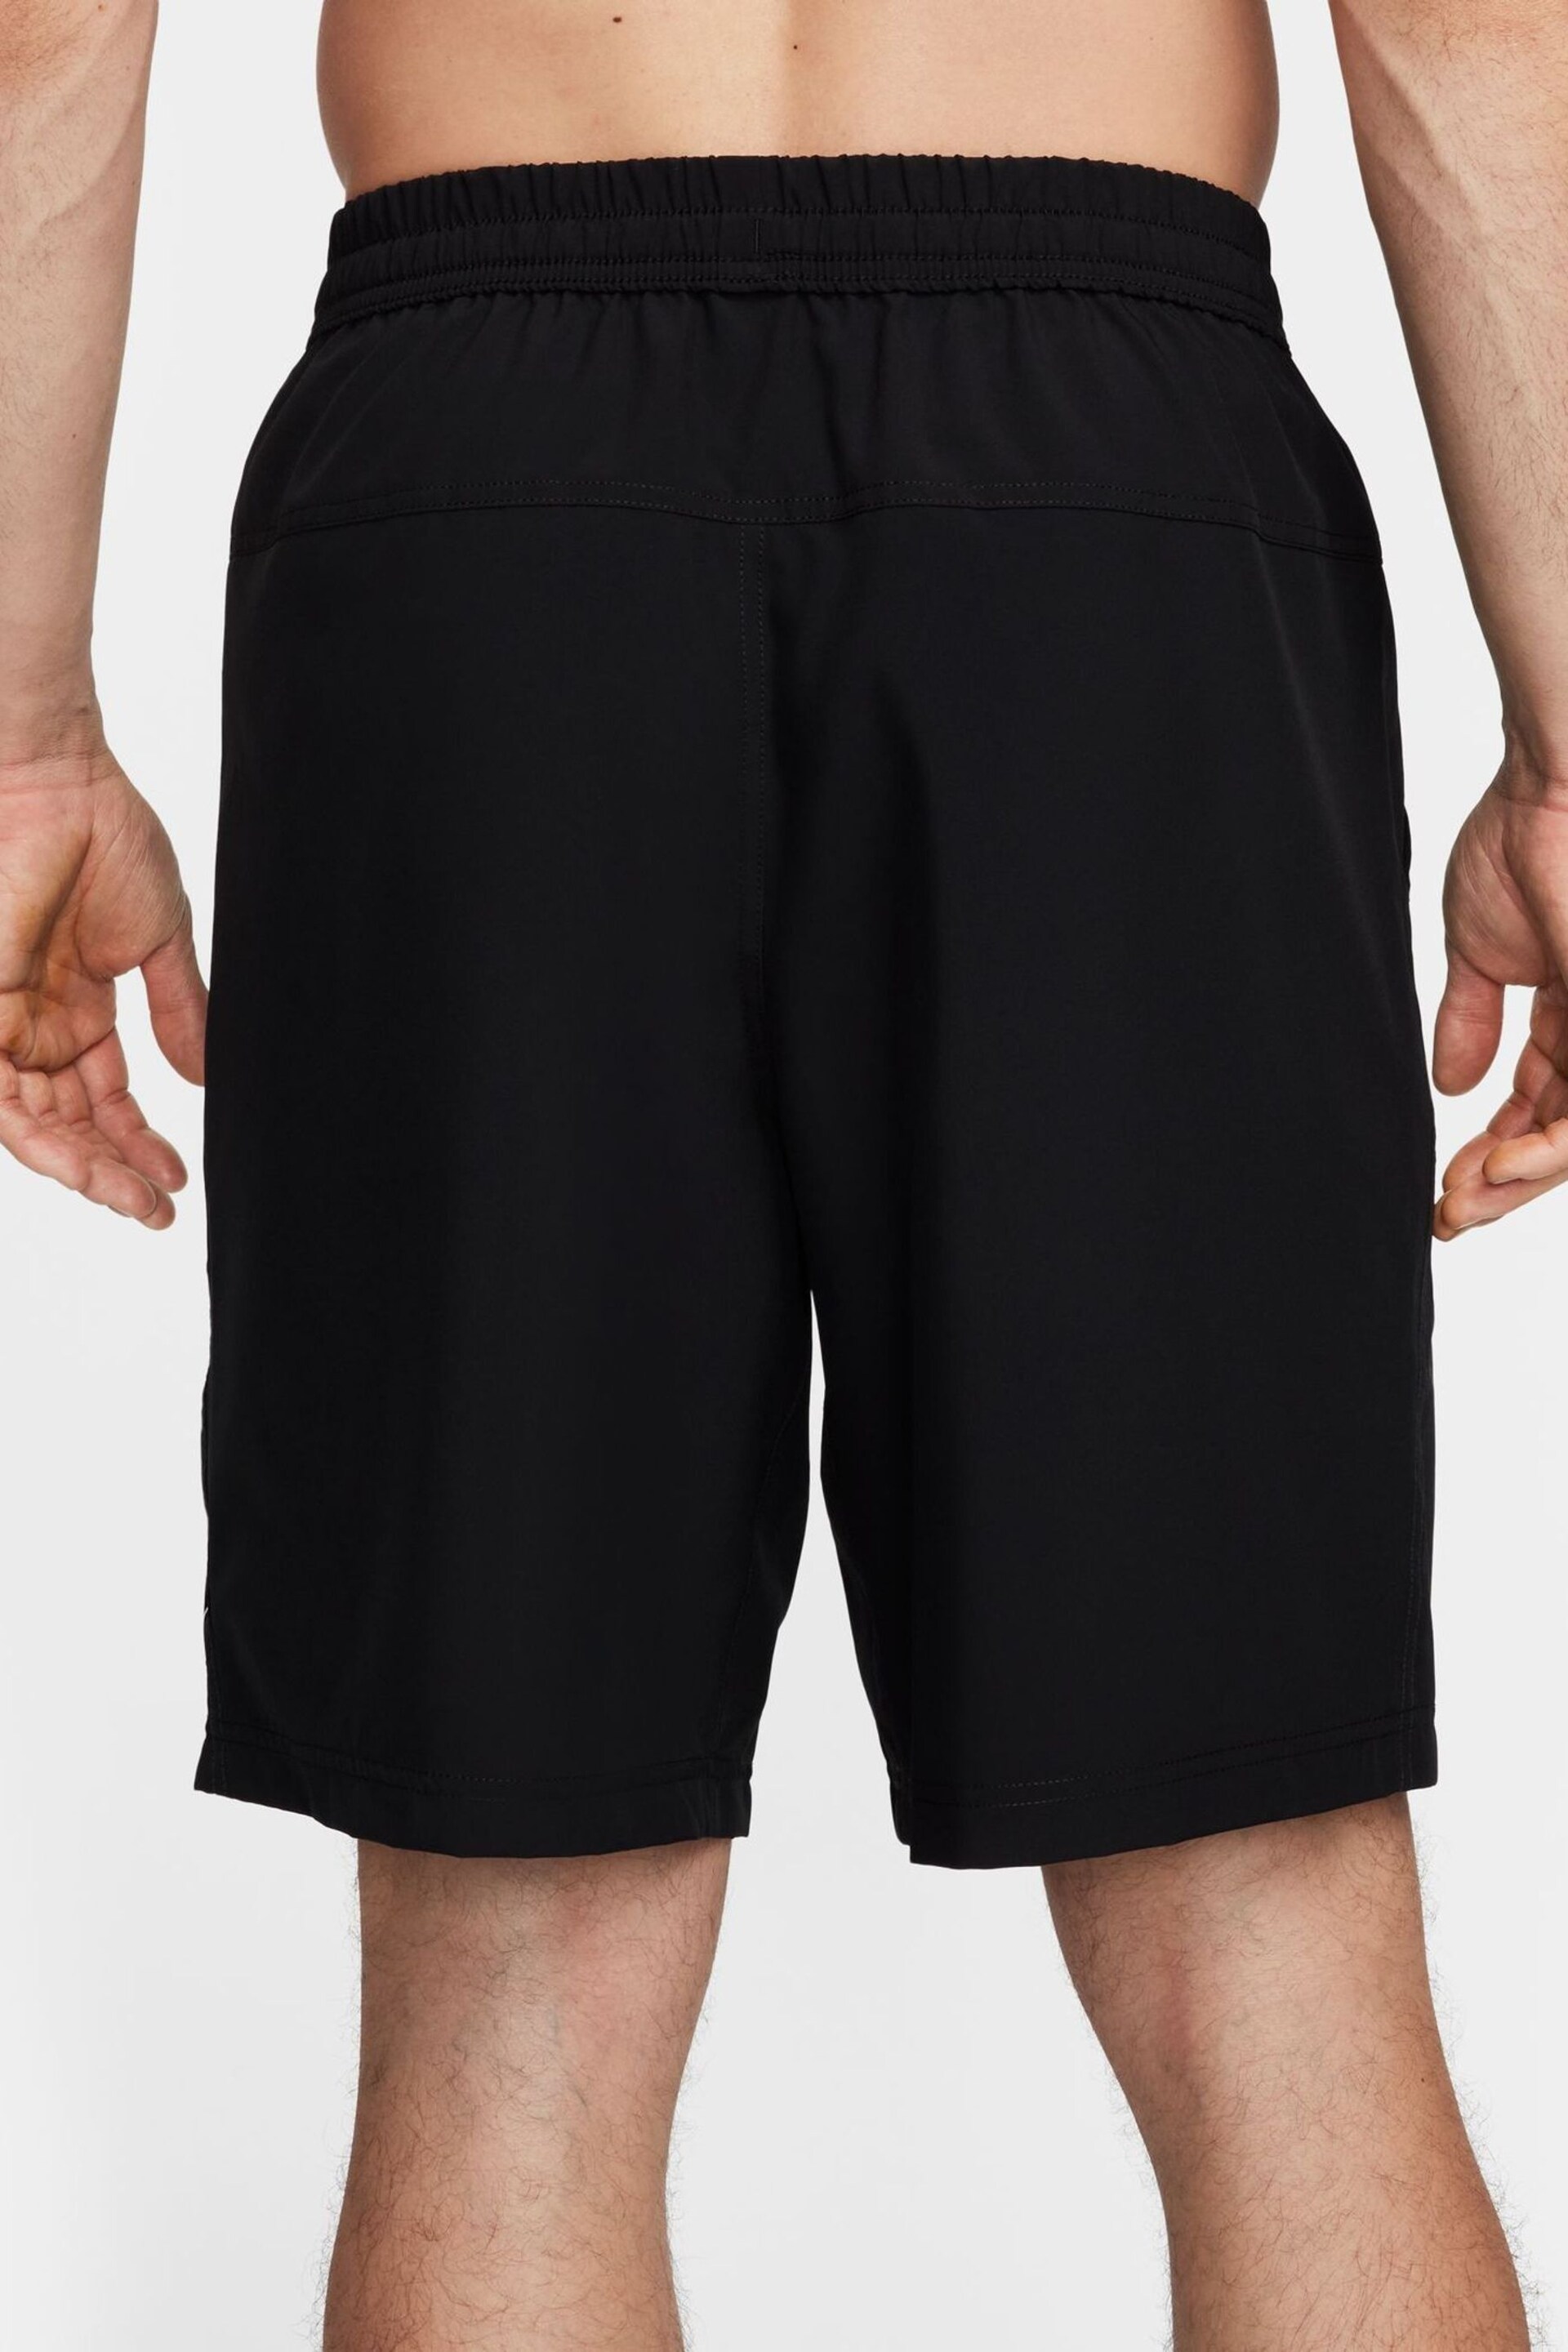 Nike Black Form Dri-FIT 9 inch Unlined Versatile Shorts - Image 3 of 7